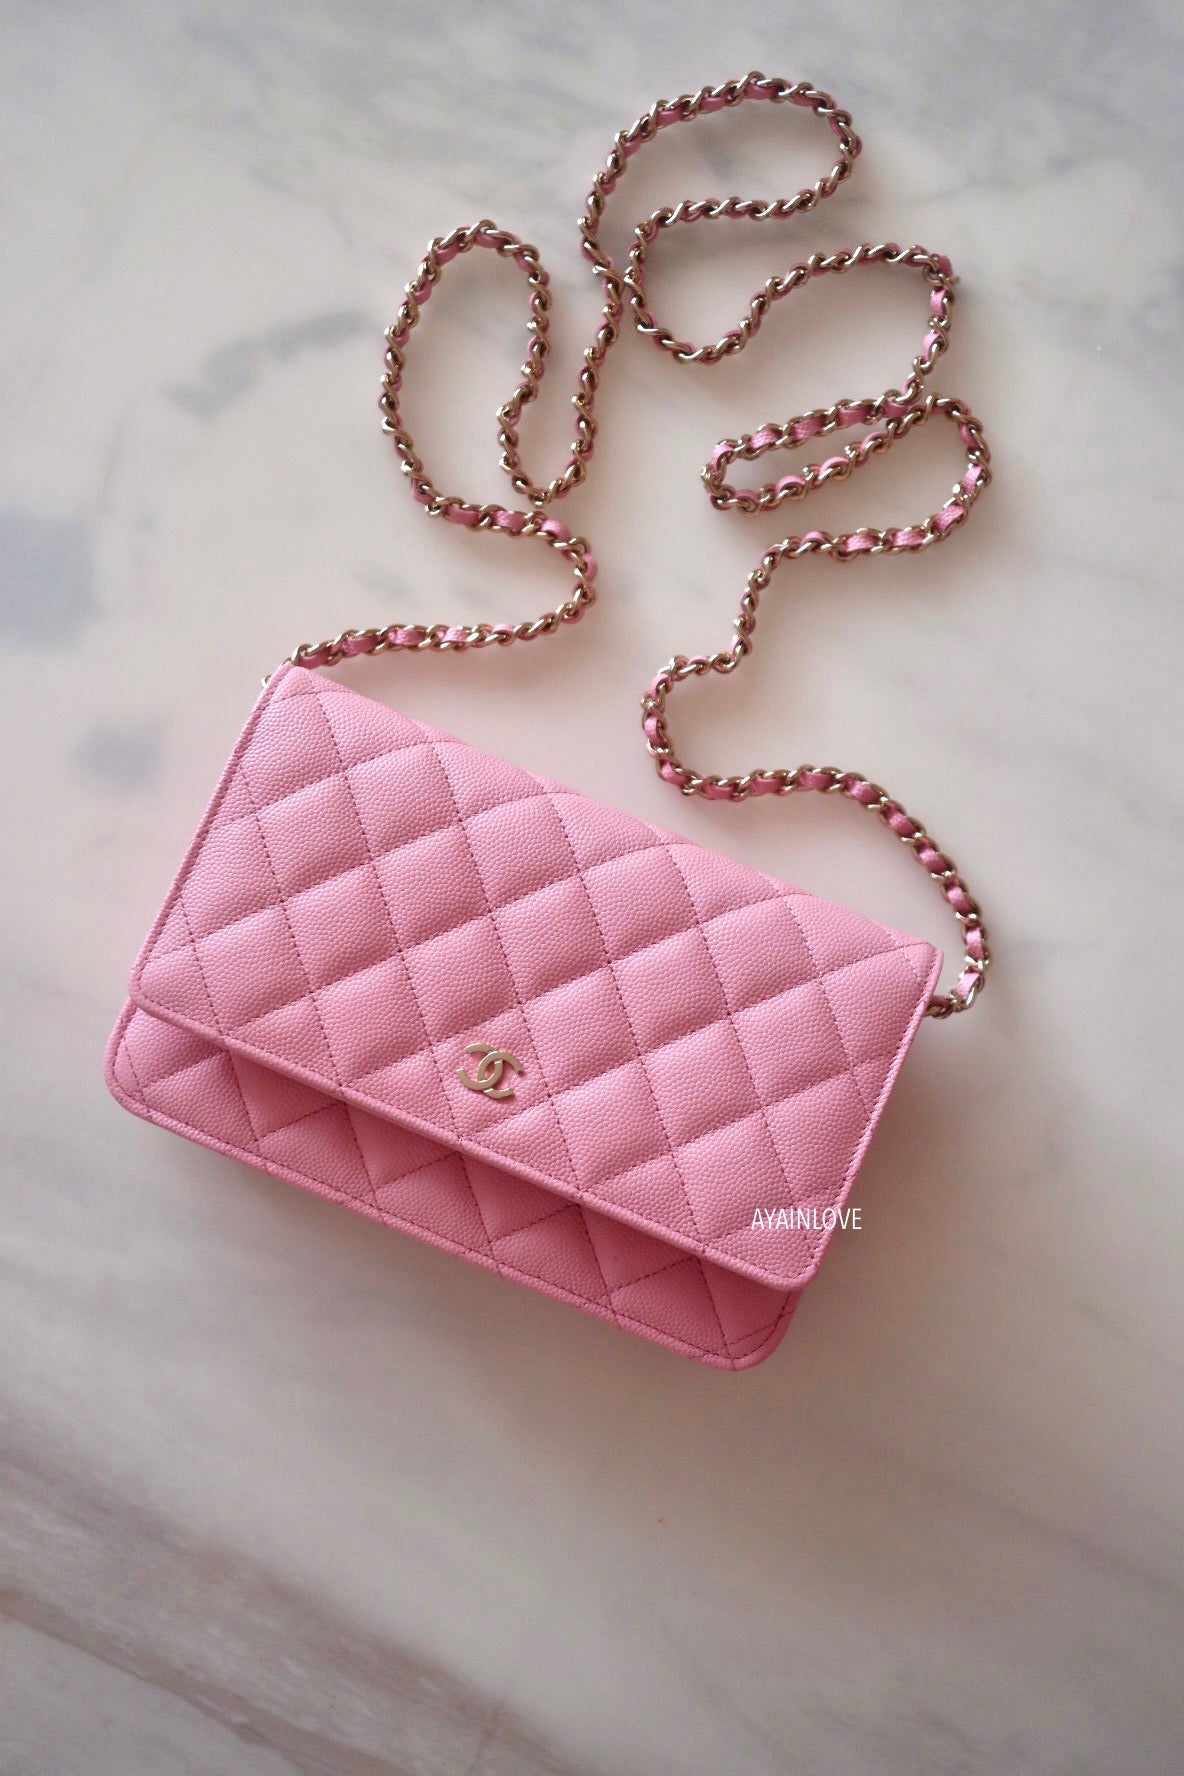 22C PINK CAVIAR CLASSIC WALLET ON CHAIN LIGHT GOLD HARDWARE *NEW* –  AYAINLOVE CURATED LUXURIES